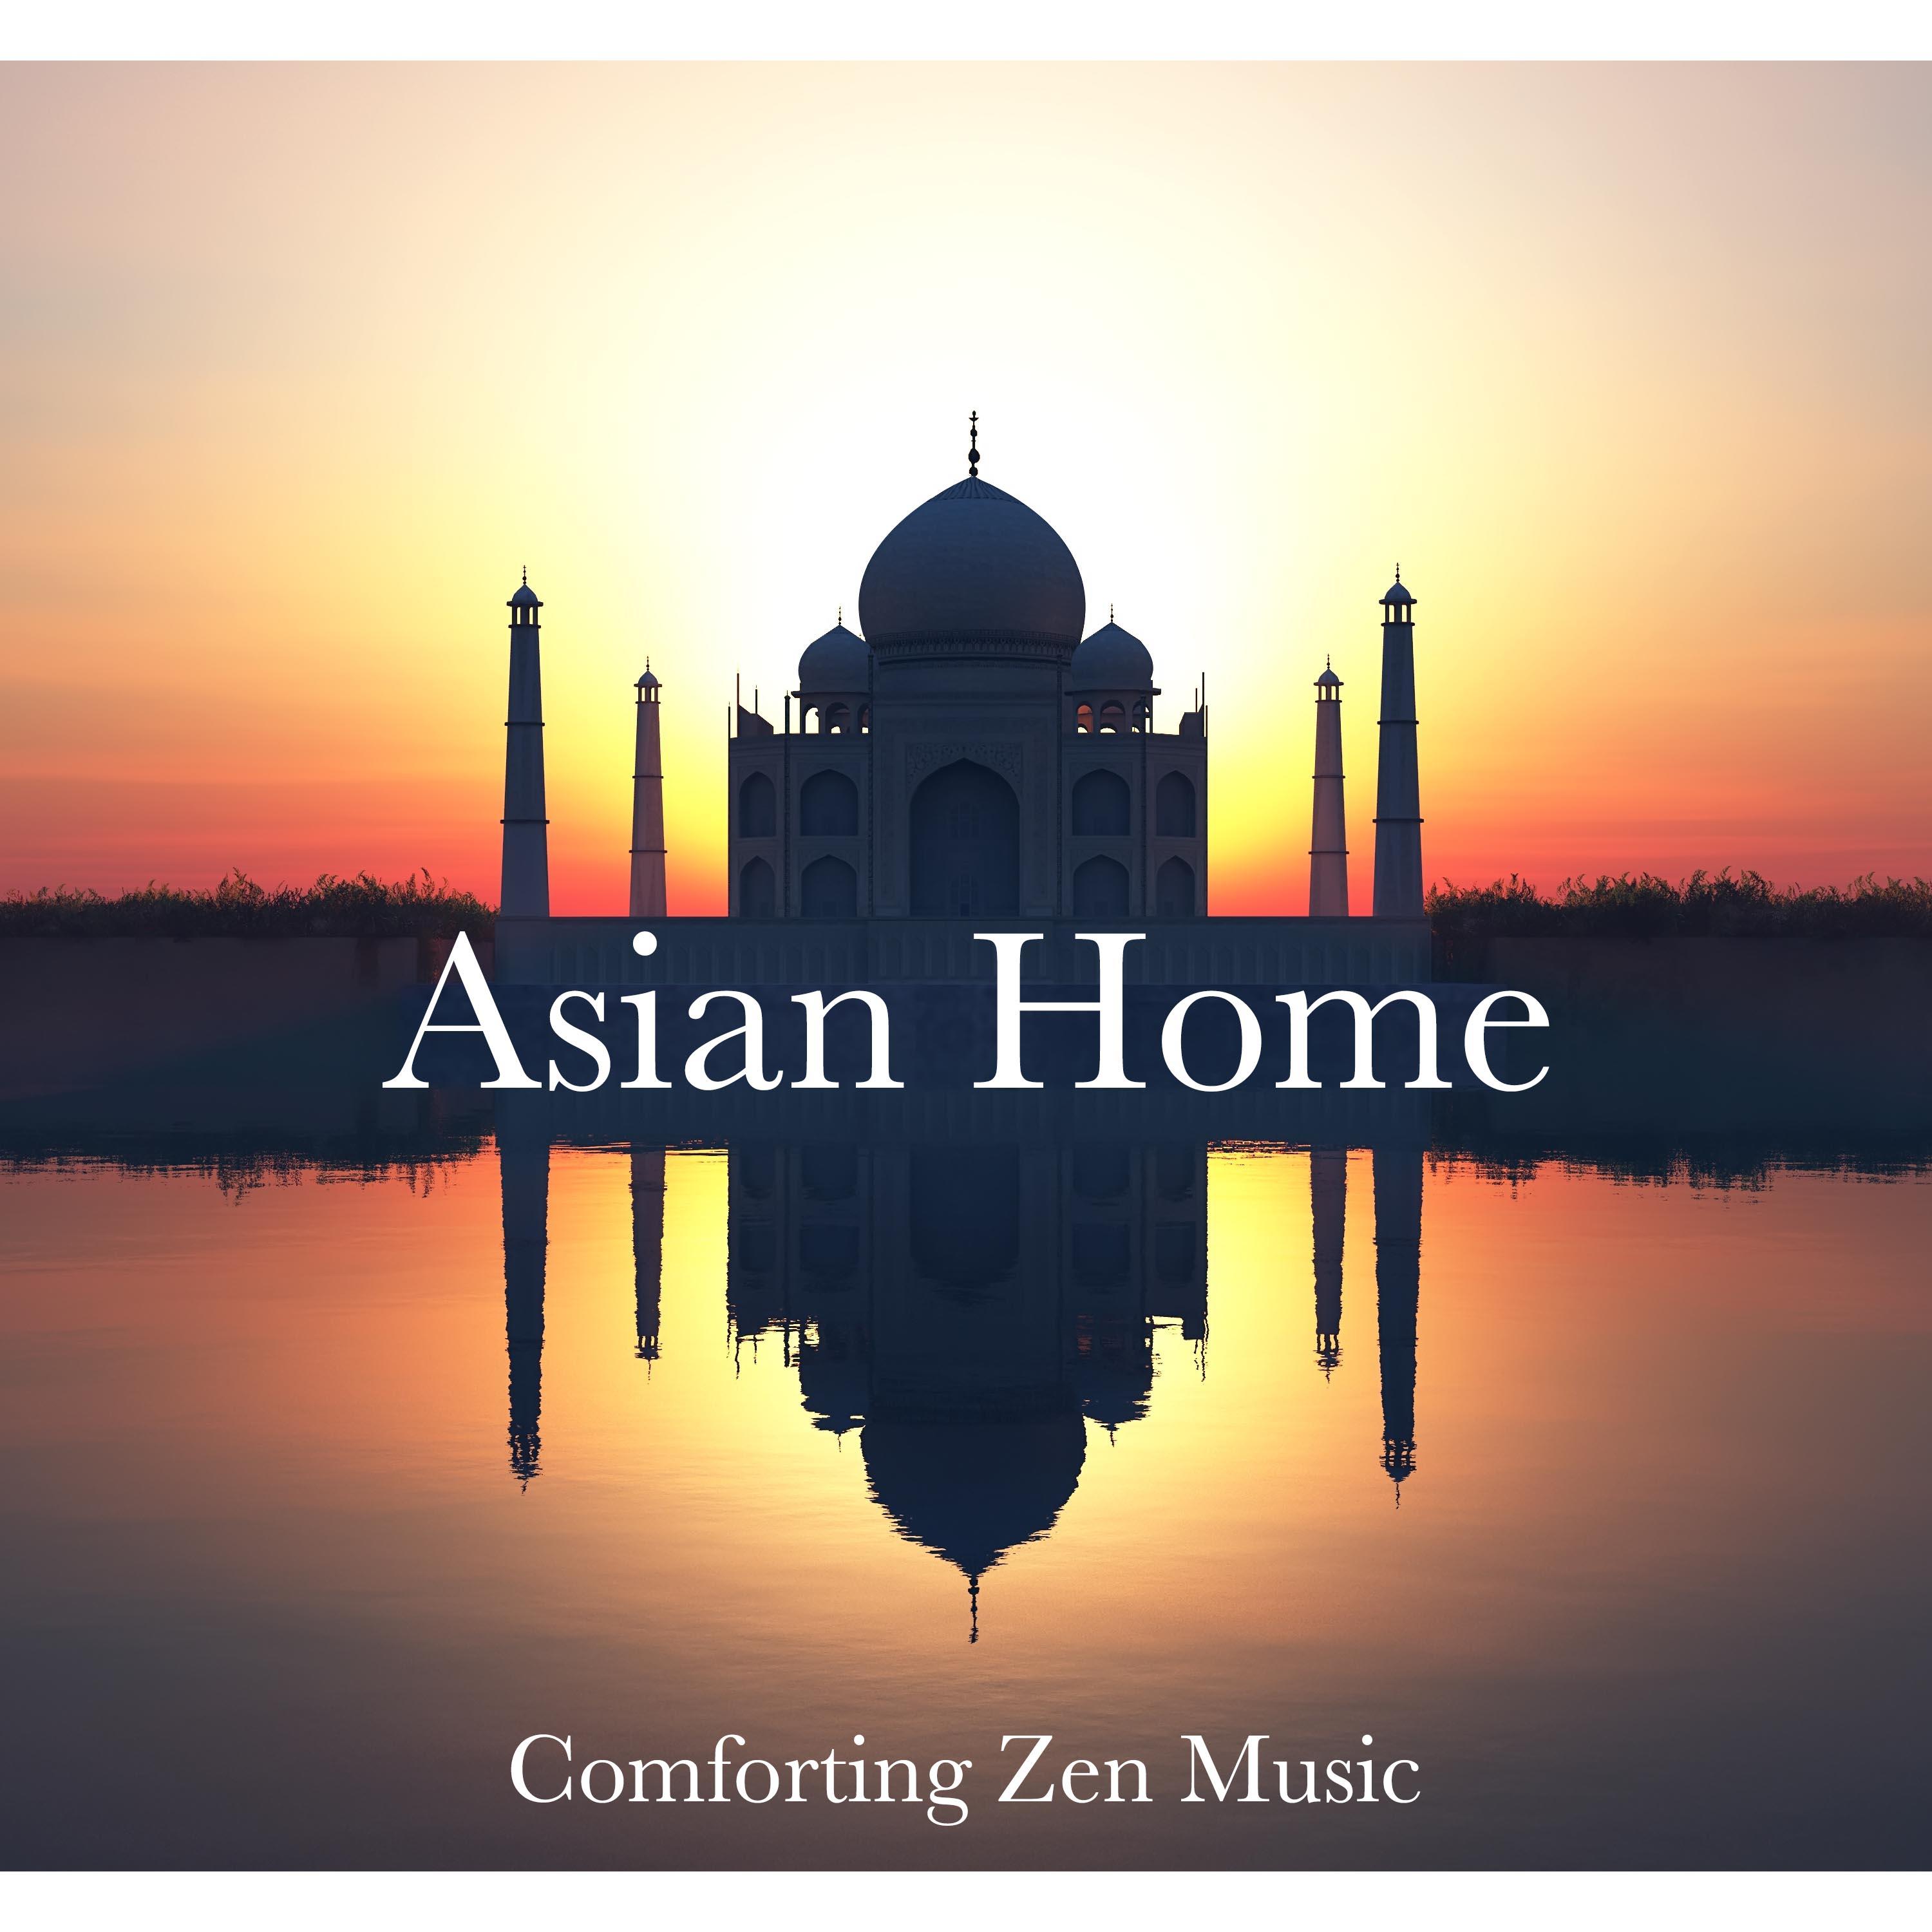 Asian Home - Warm, Comforting Zen Music with Peaceful and Inspirational Oriental Songs